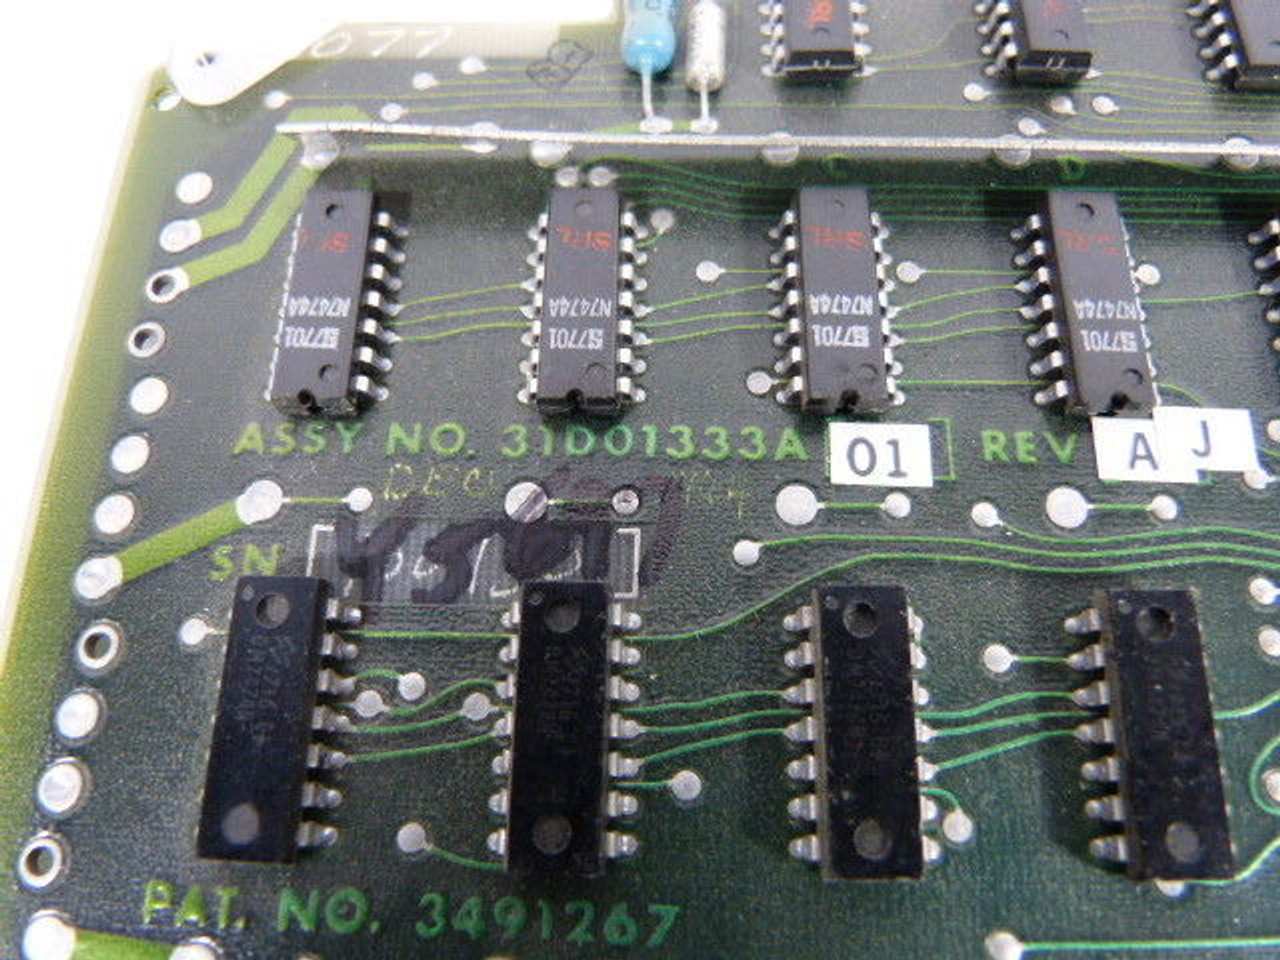 General Automation 31D01333A Memory Card Board Assembly USED